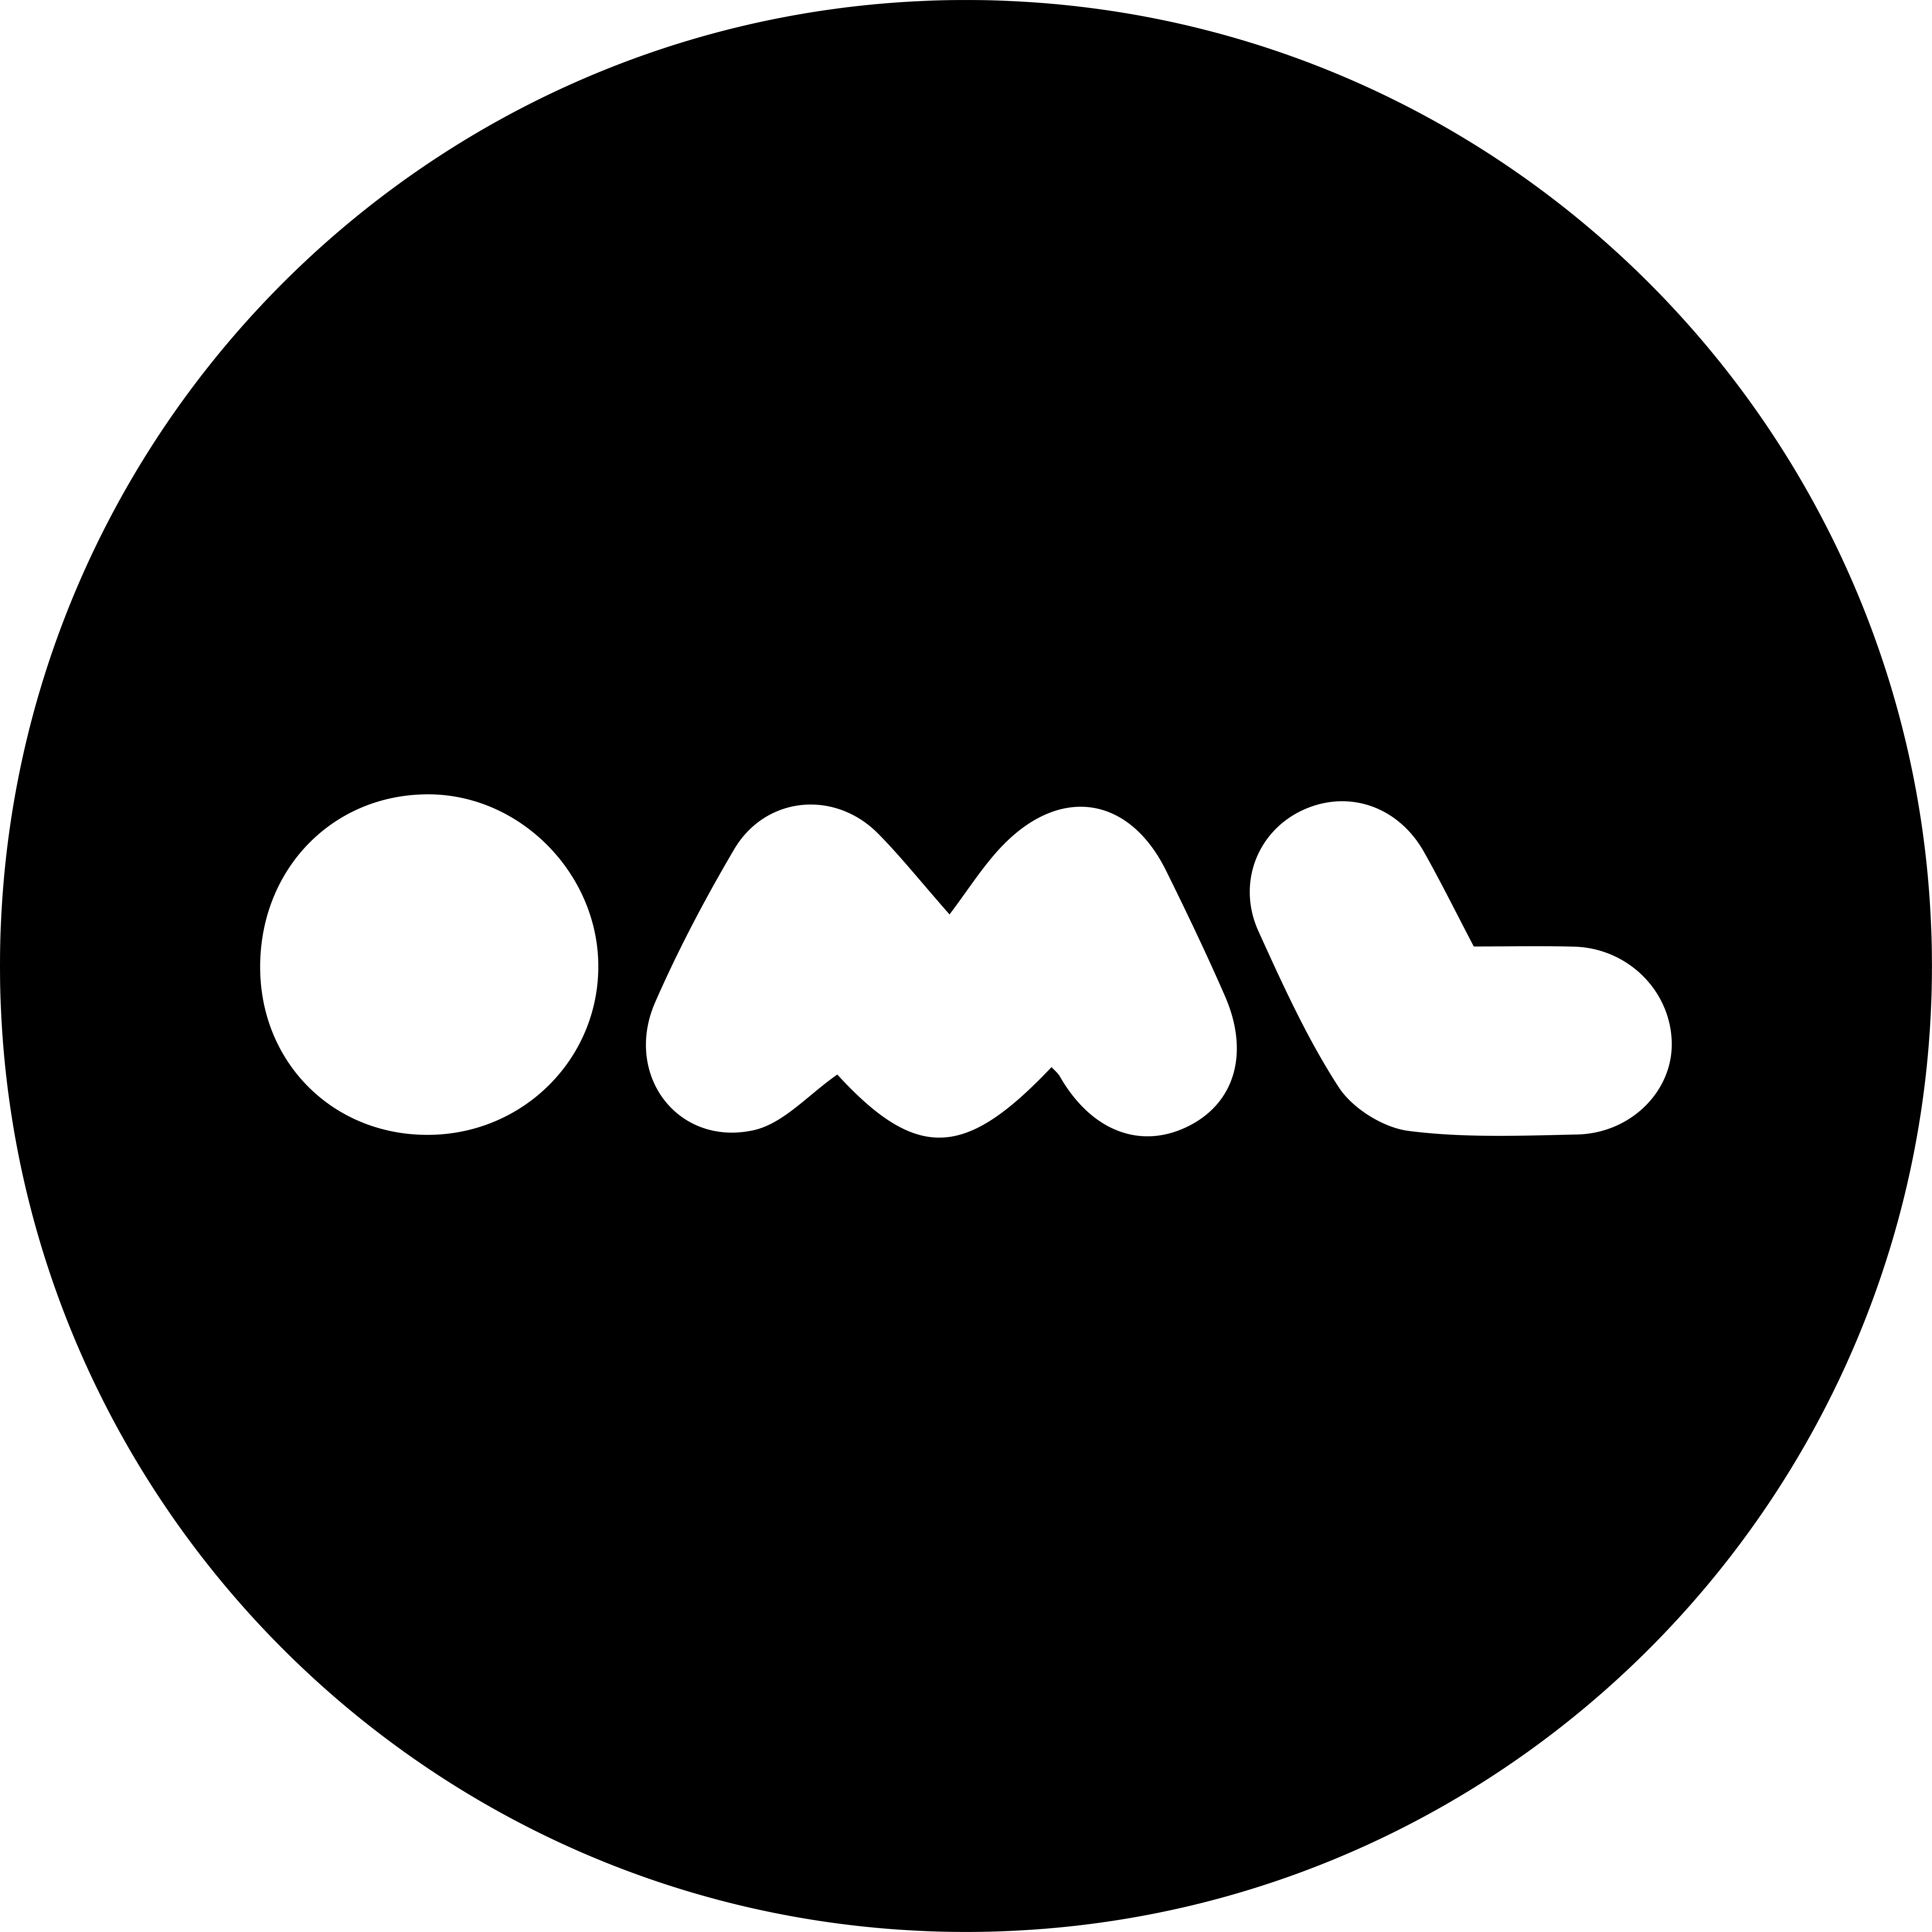 OML strengthens its creative team appointing Manav Parekh as the Creative Head-thumnail